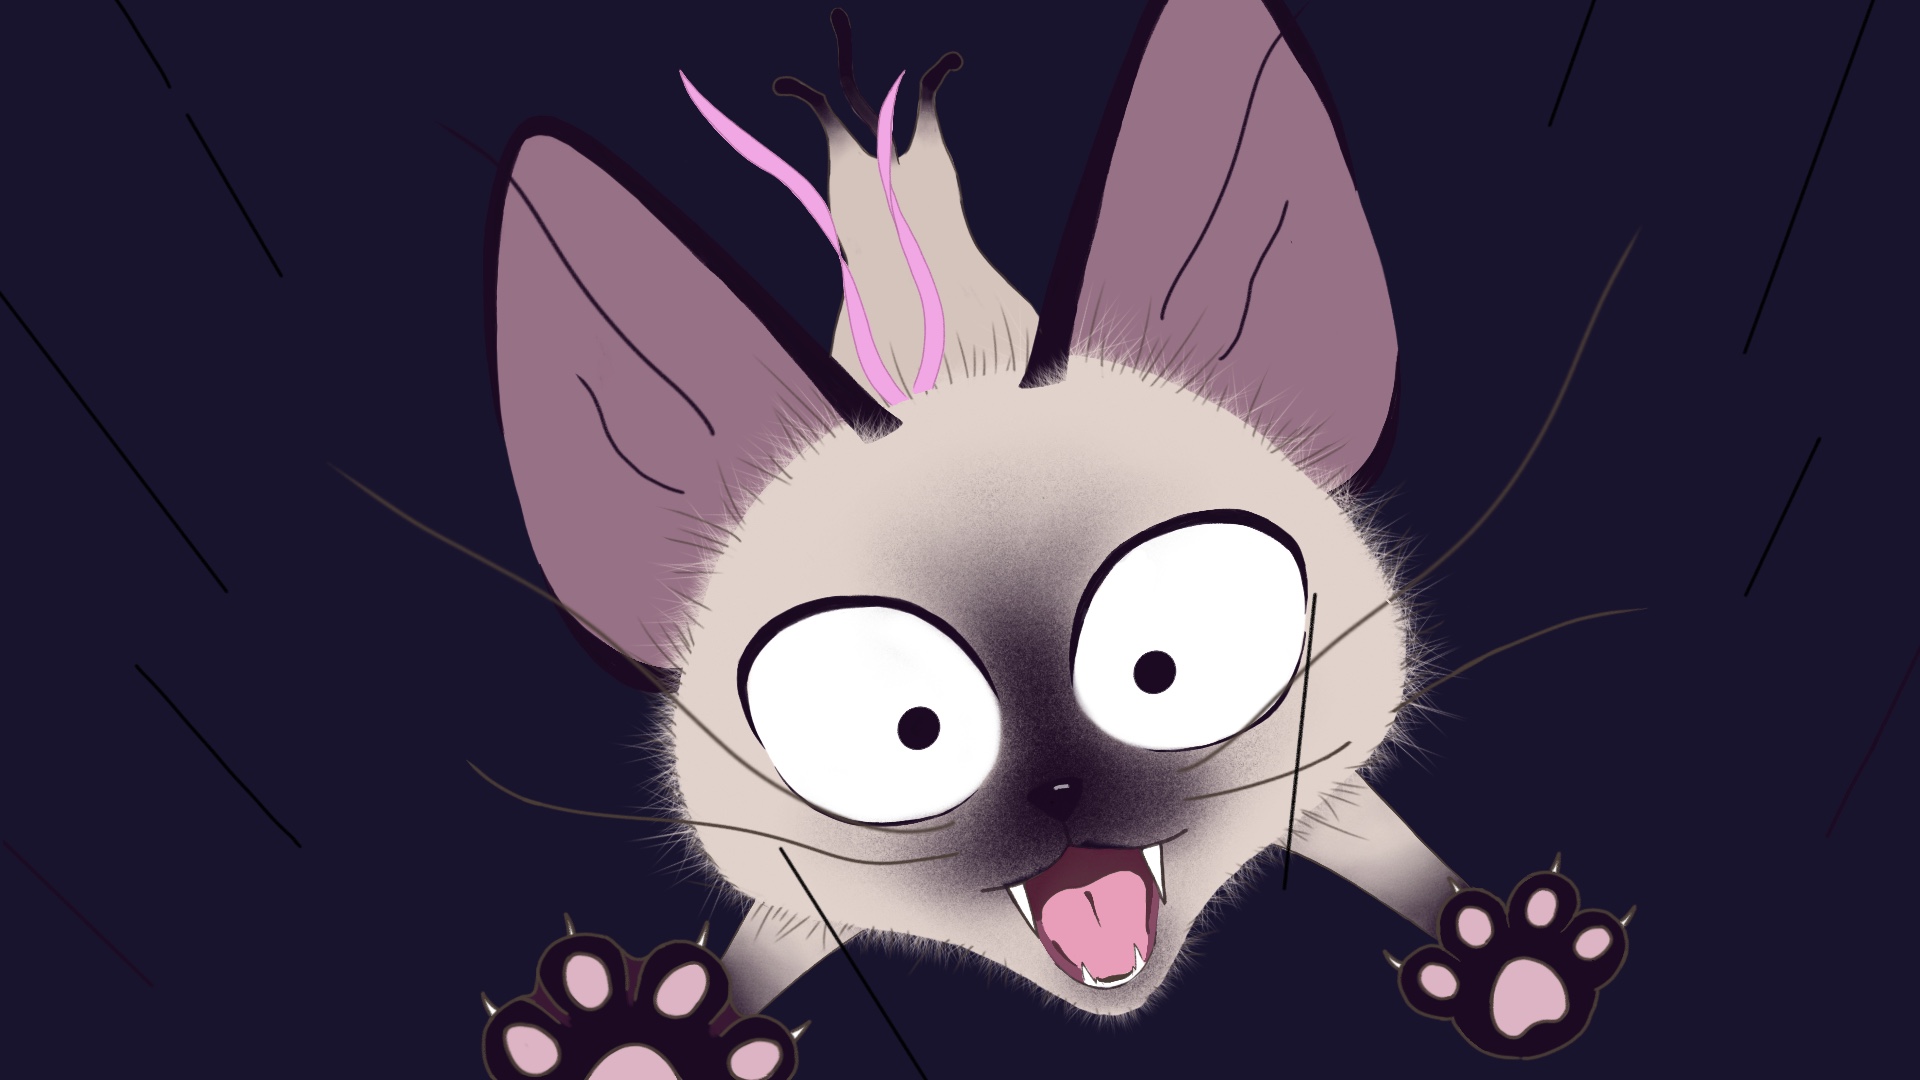 Close-up illustration of falling Siamese cat's face